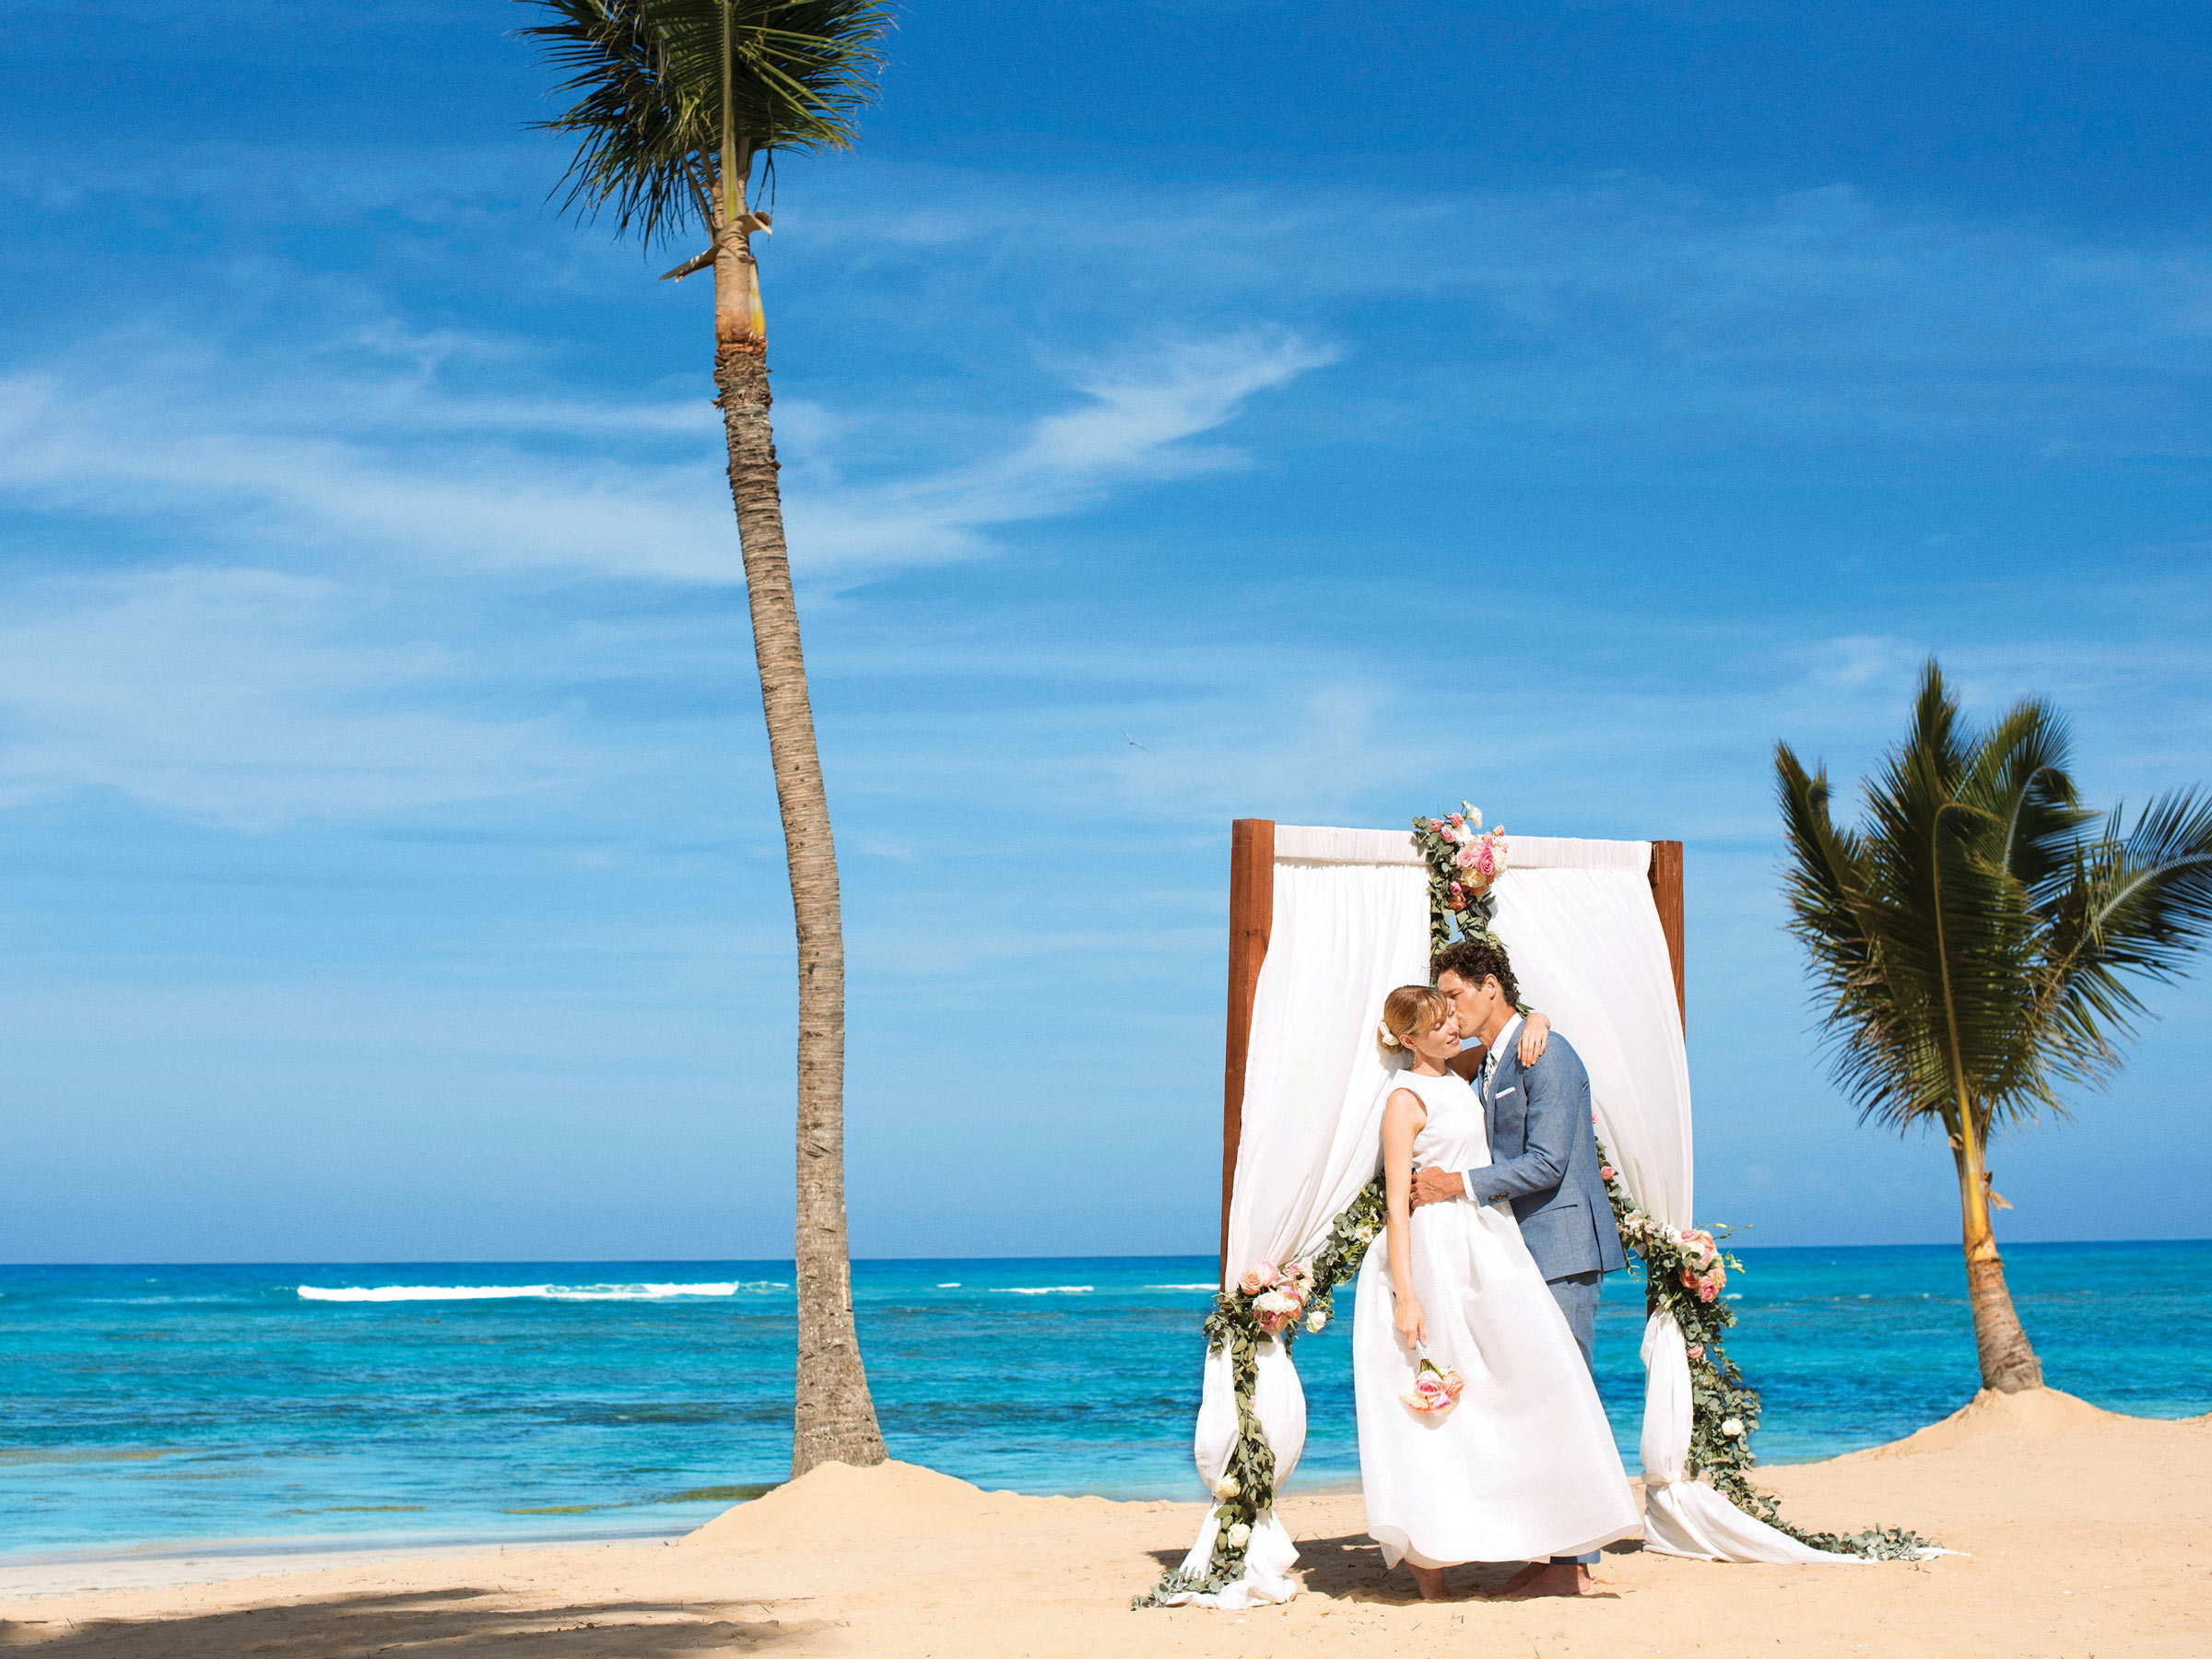 Excellence El Carmen the Best Resort to Renew Your Wedding Vows